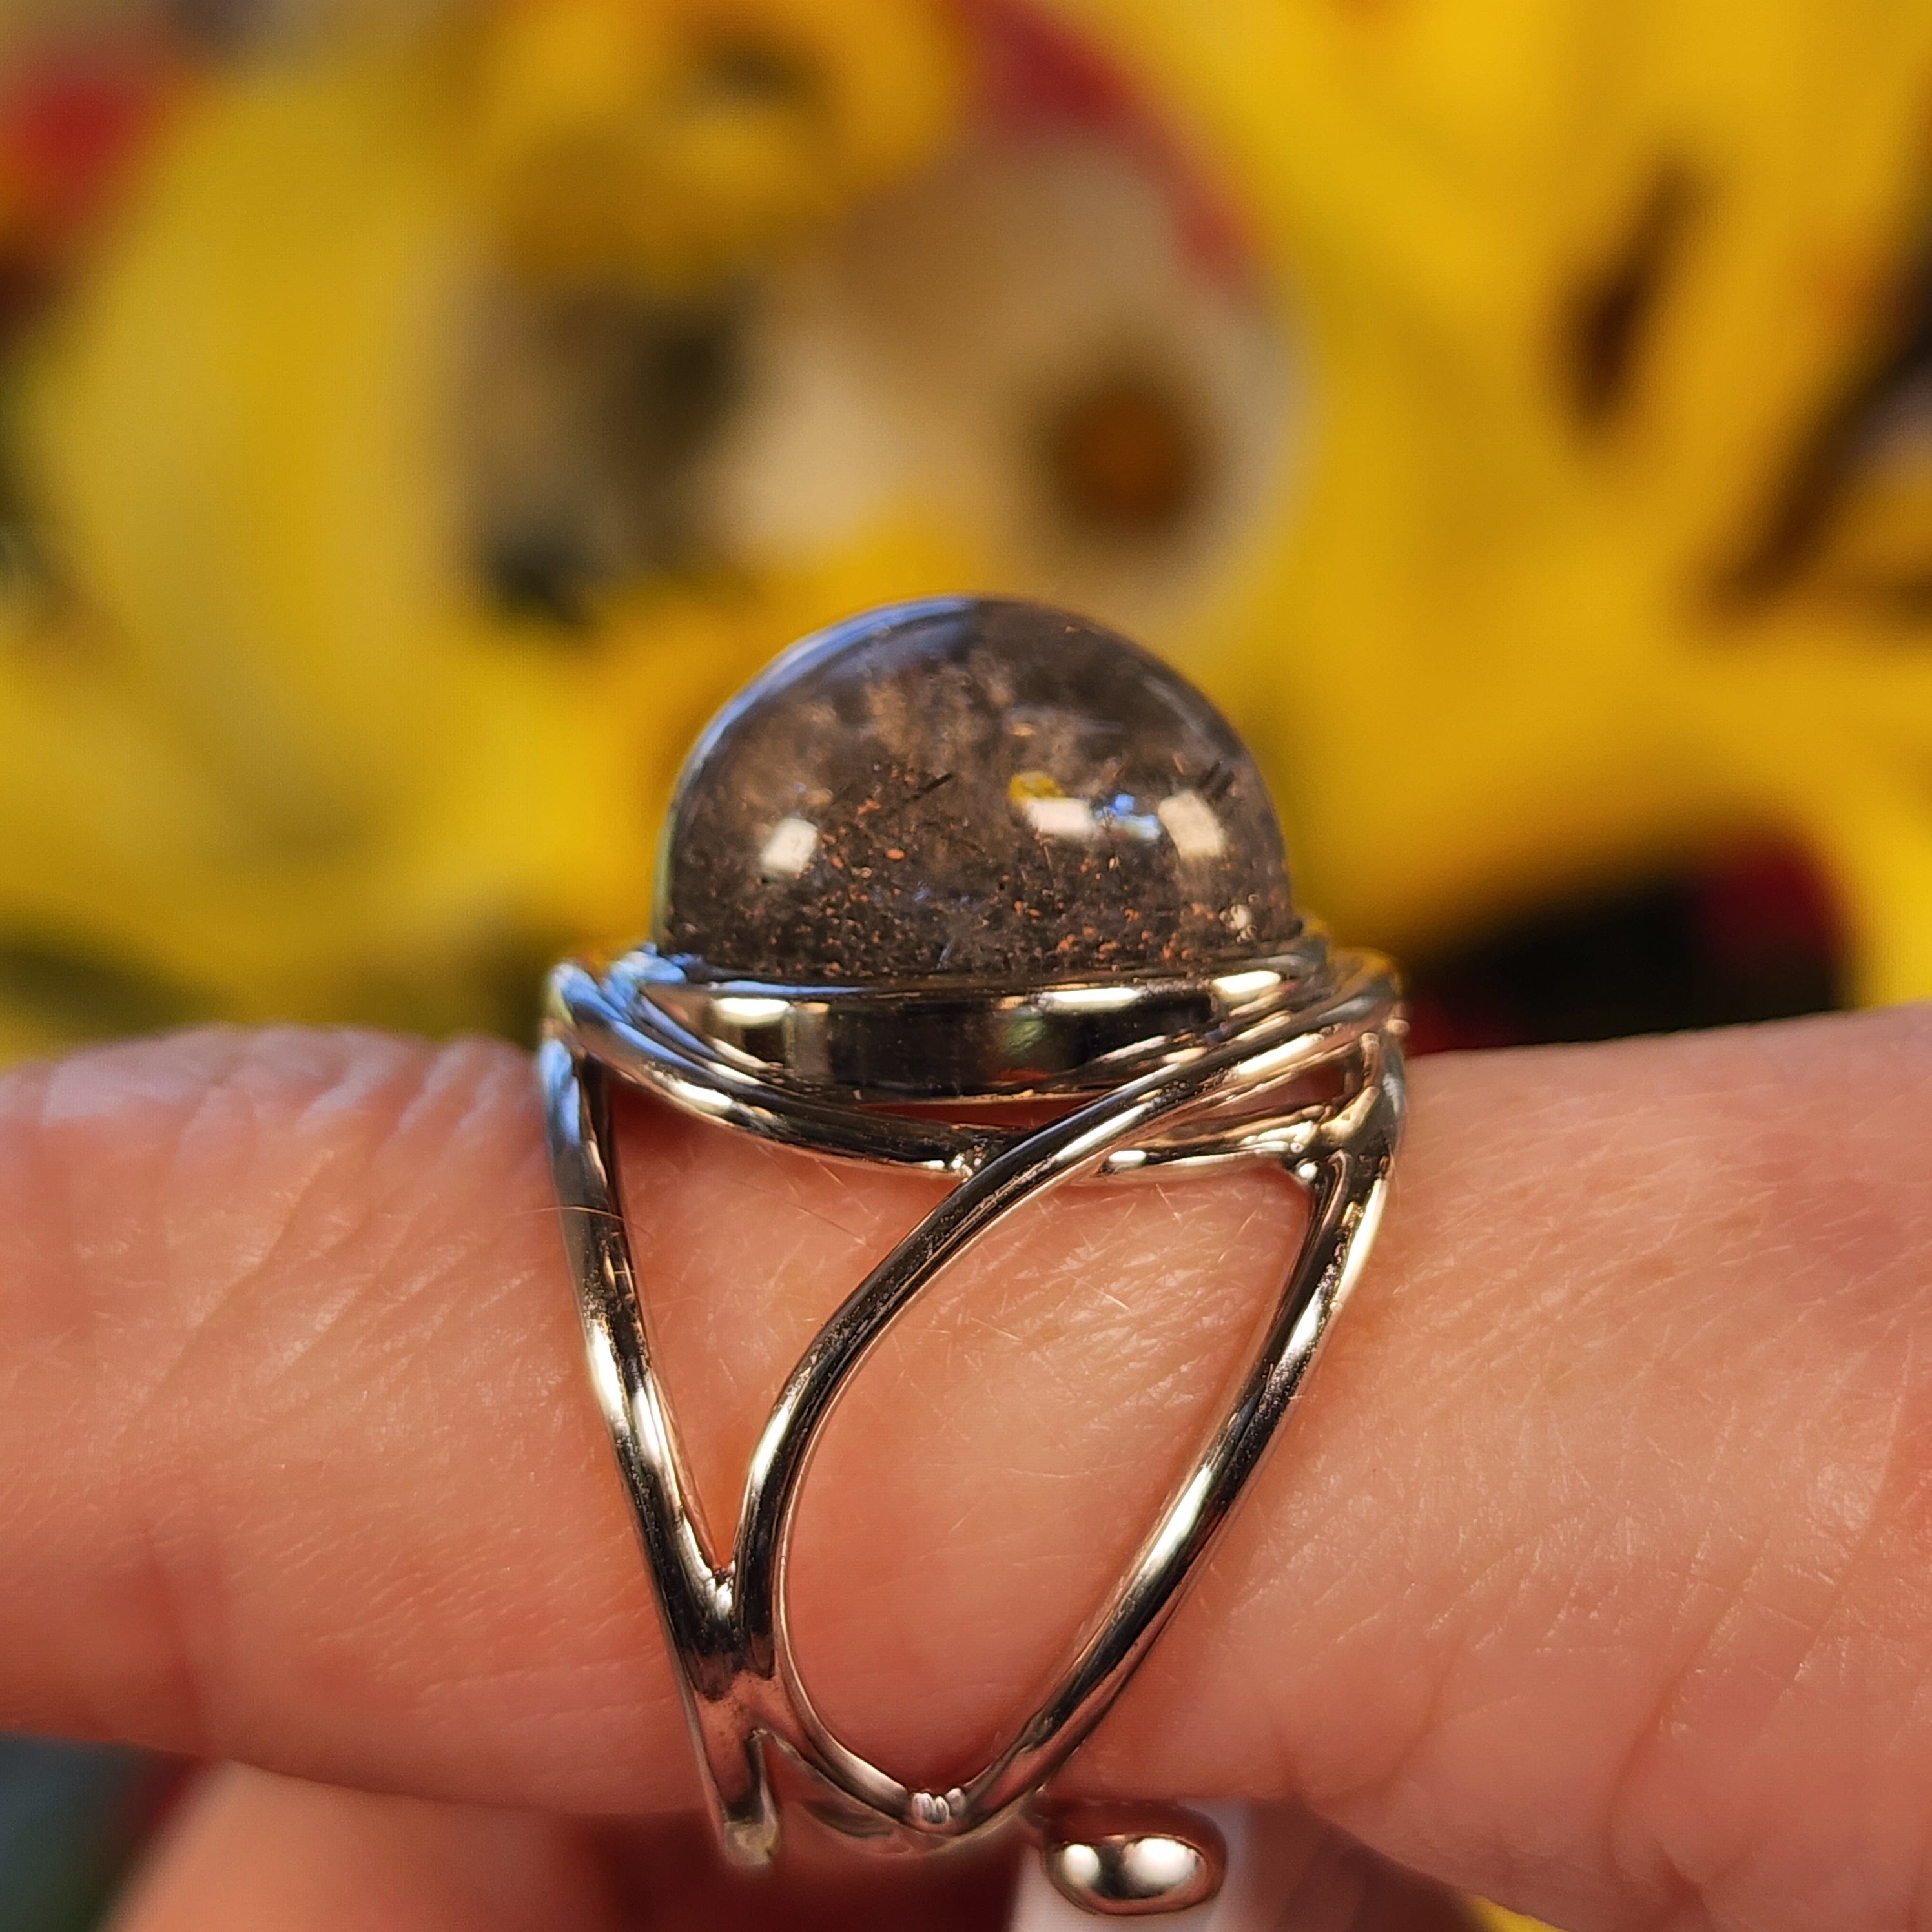 Silver Garden Quartz Finger Cuff Adjustable Ring .925 Silver for Grounding, Protection and Shamanic Journey